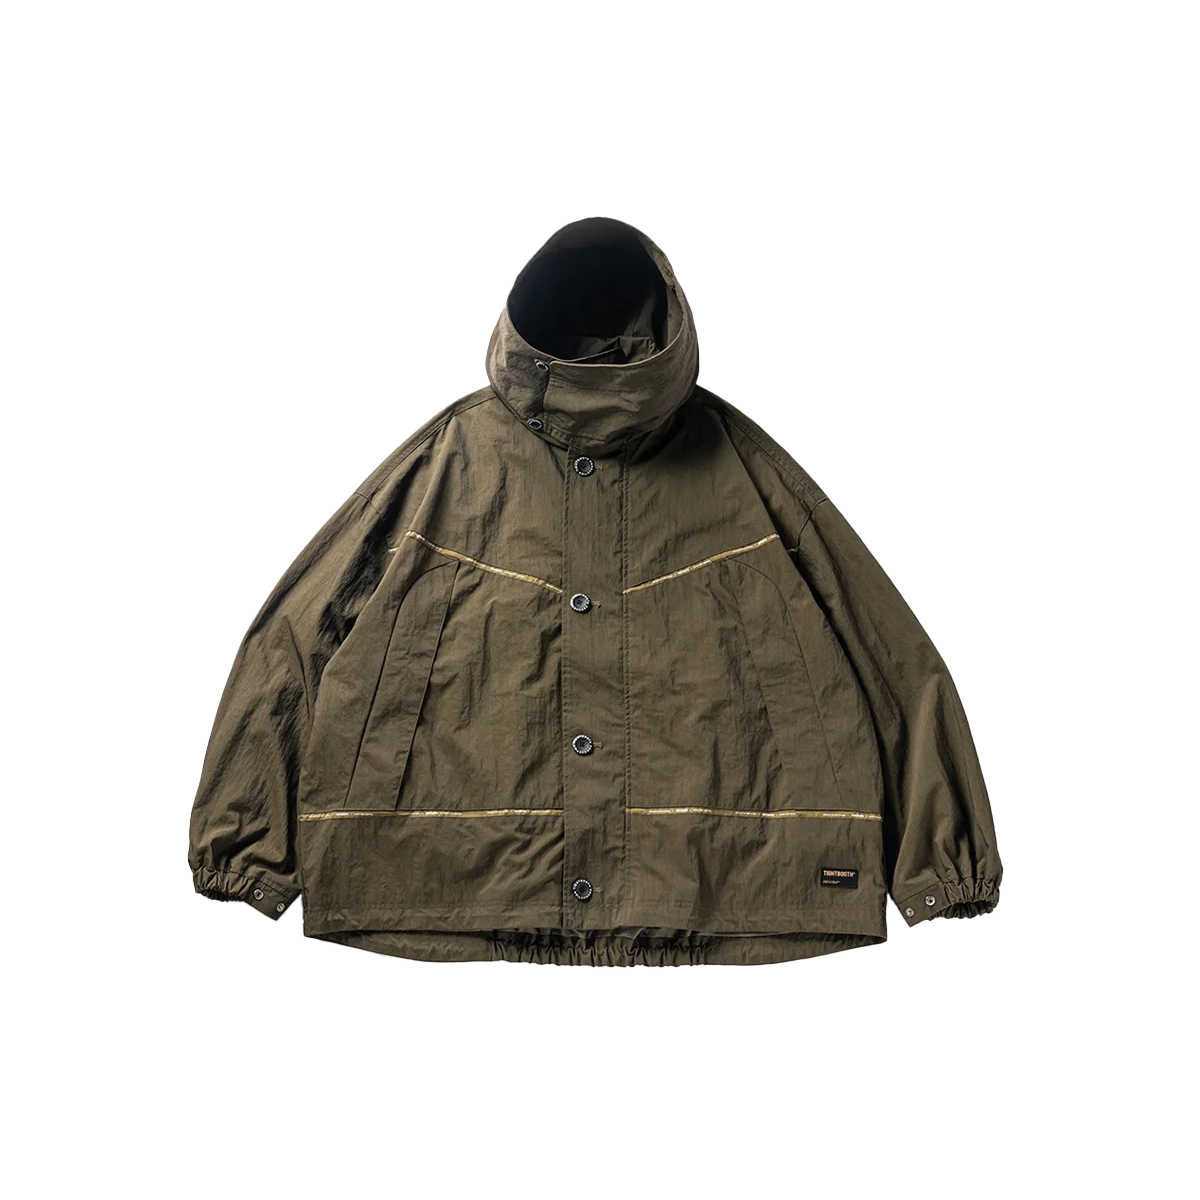 TIGHTBOOTH - Hunting Jacket - 2 Colors